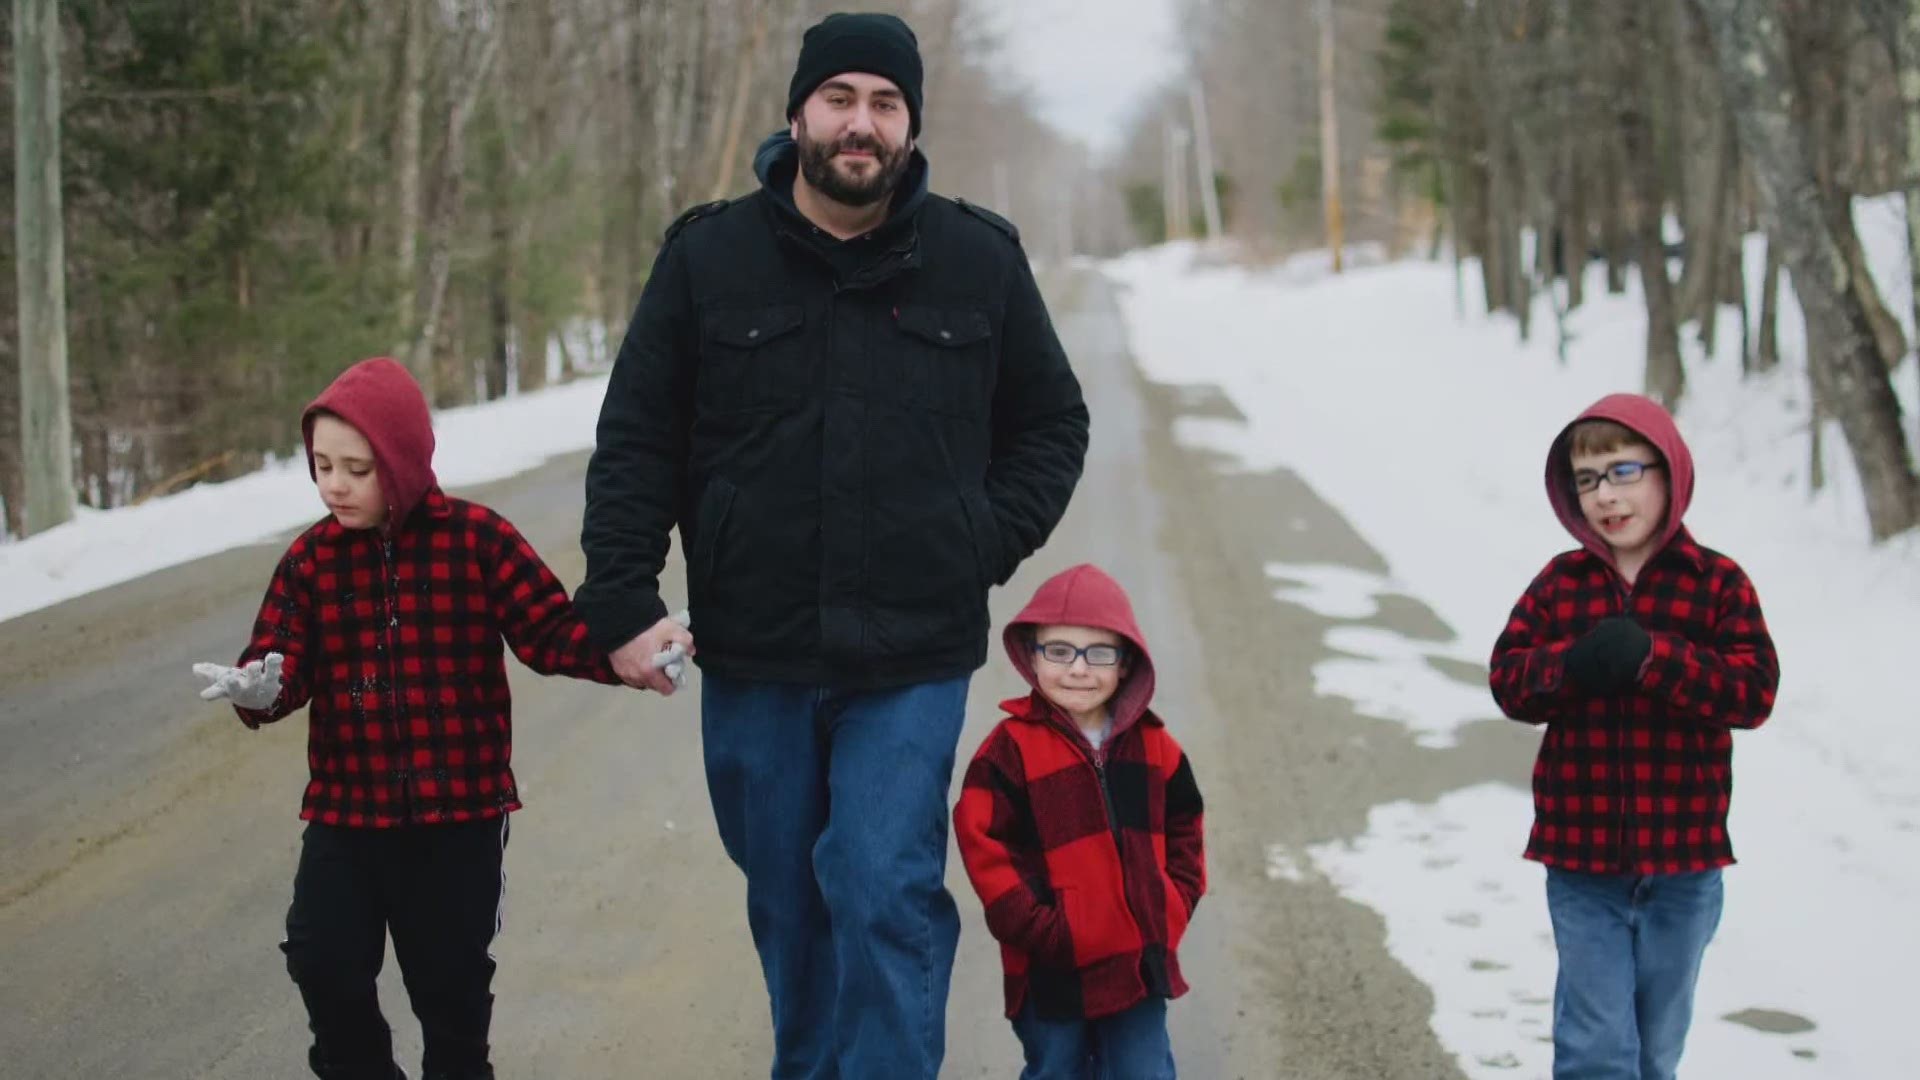 Family fears kids with special needs are falling behind, wants schools to open for them